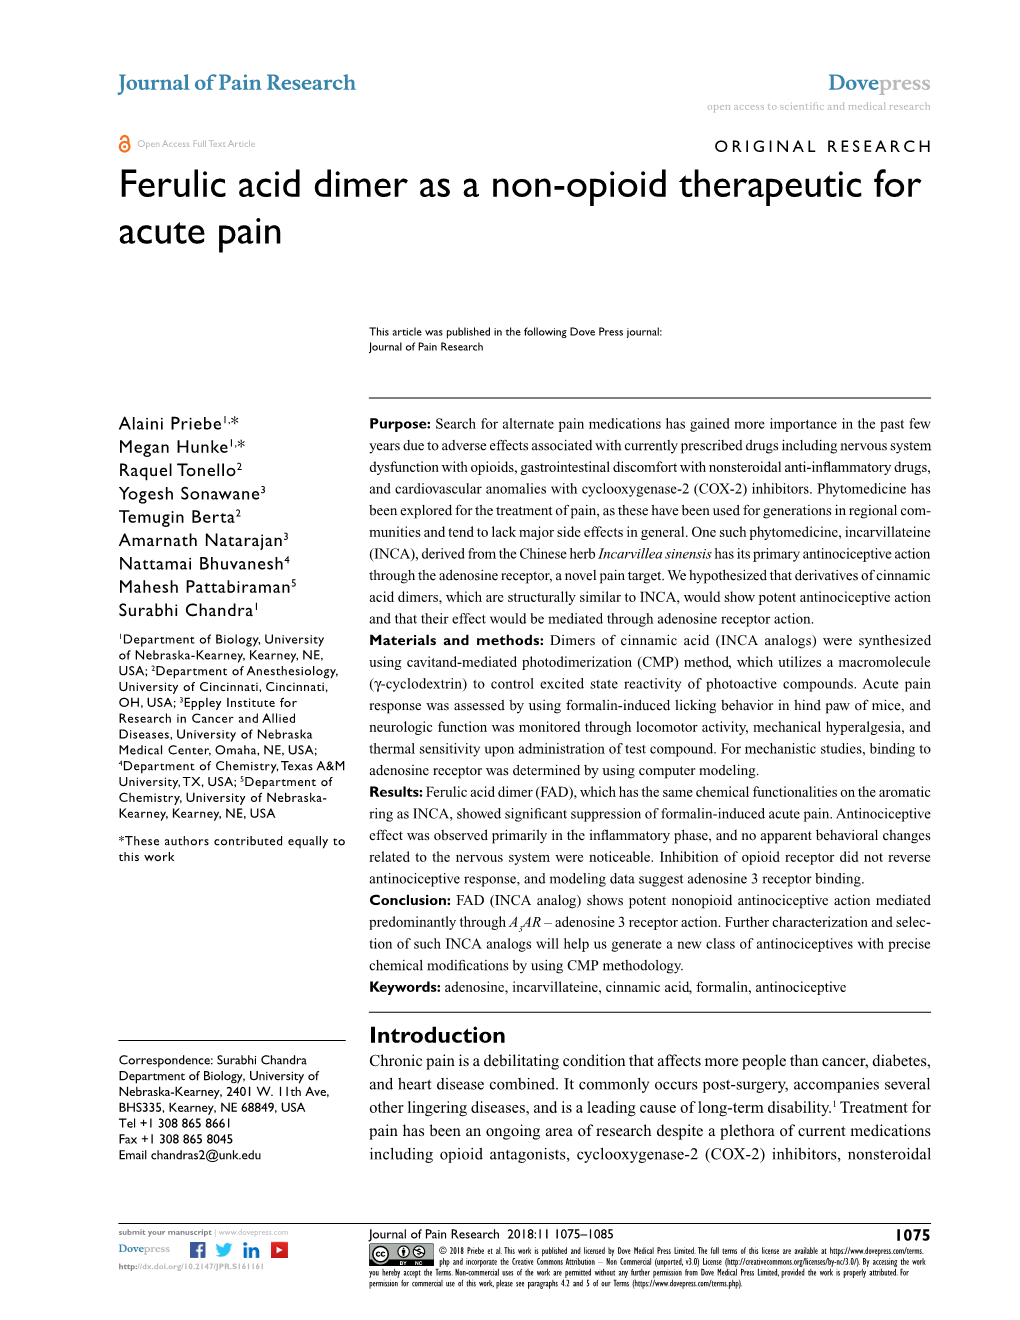 Ferulic Acid Dimer As a Non-Opioid Therapeutic for Acute Pain